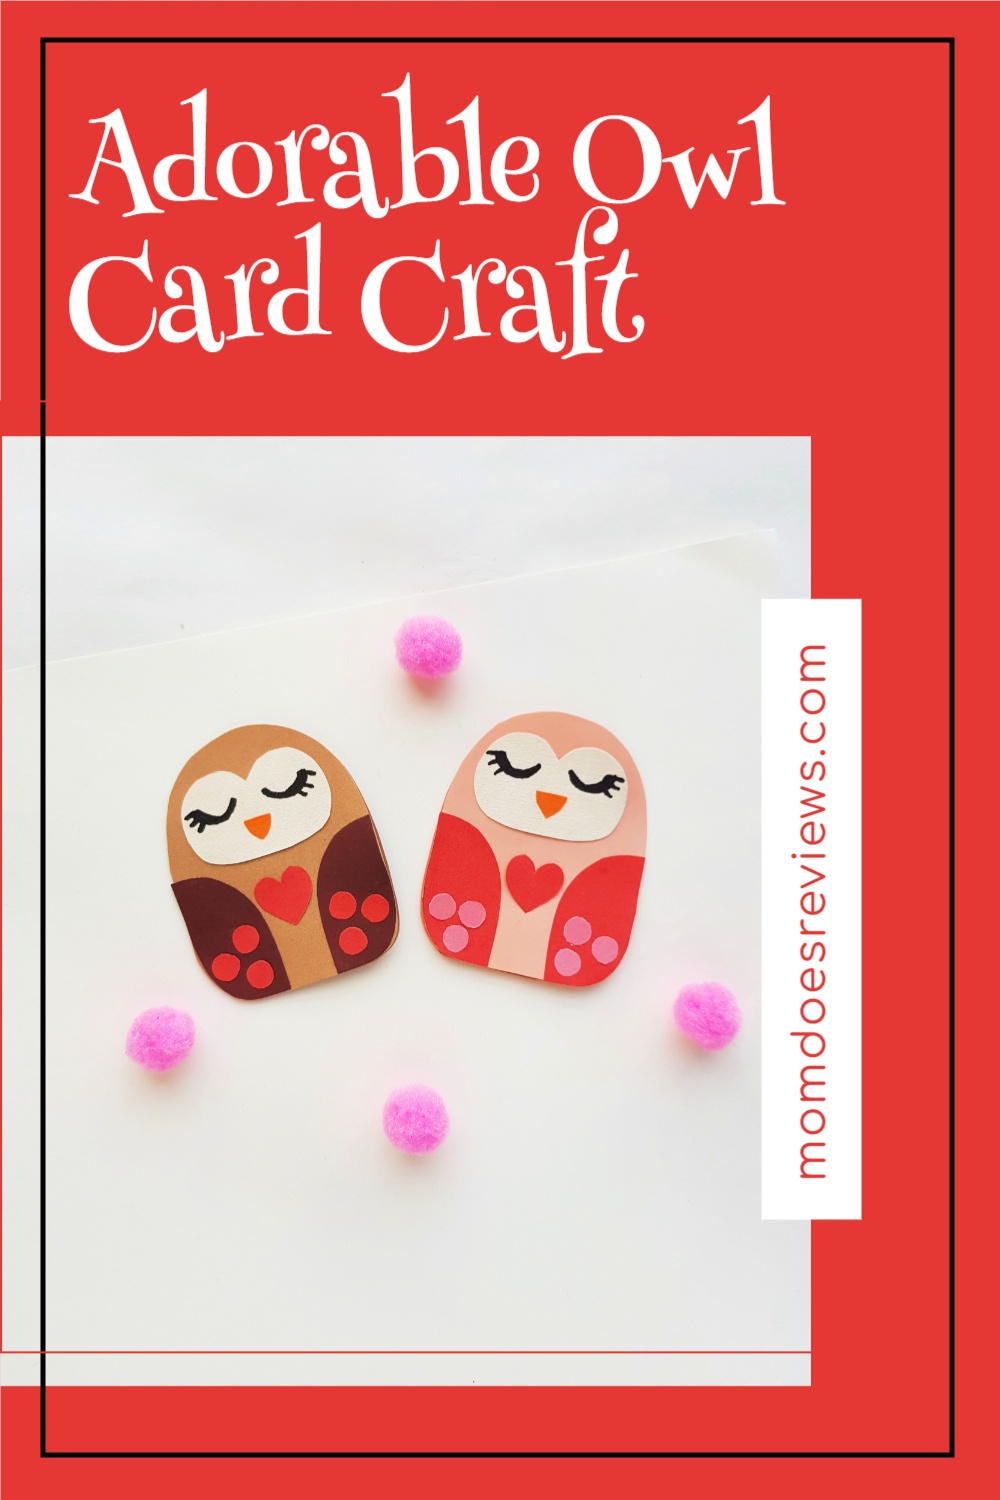 Adorable Owl Card Craft the Kids Will Love #craft #owlcraft #papercraft #valentinesday 